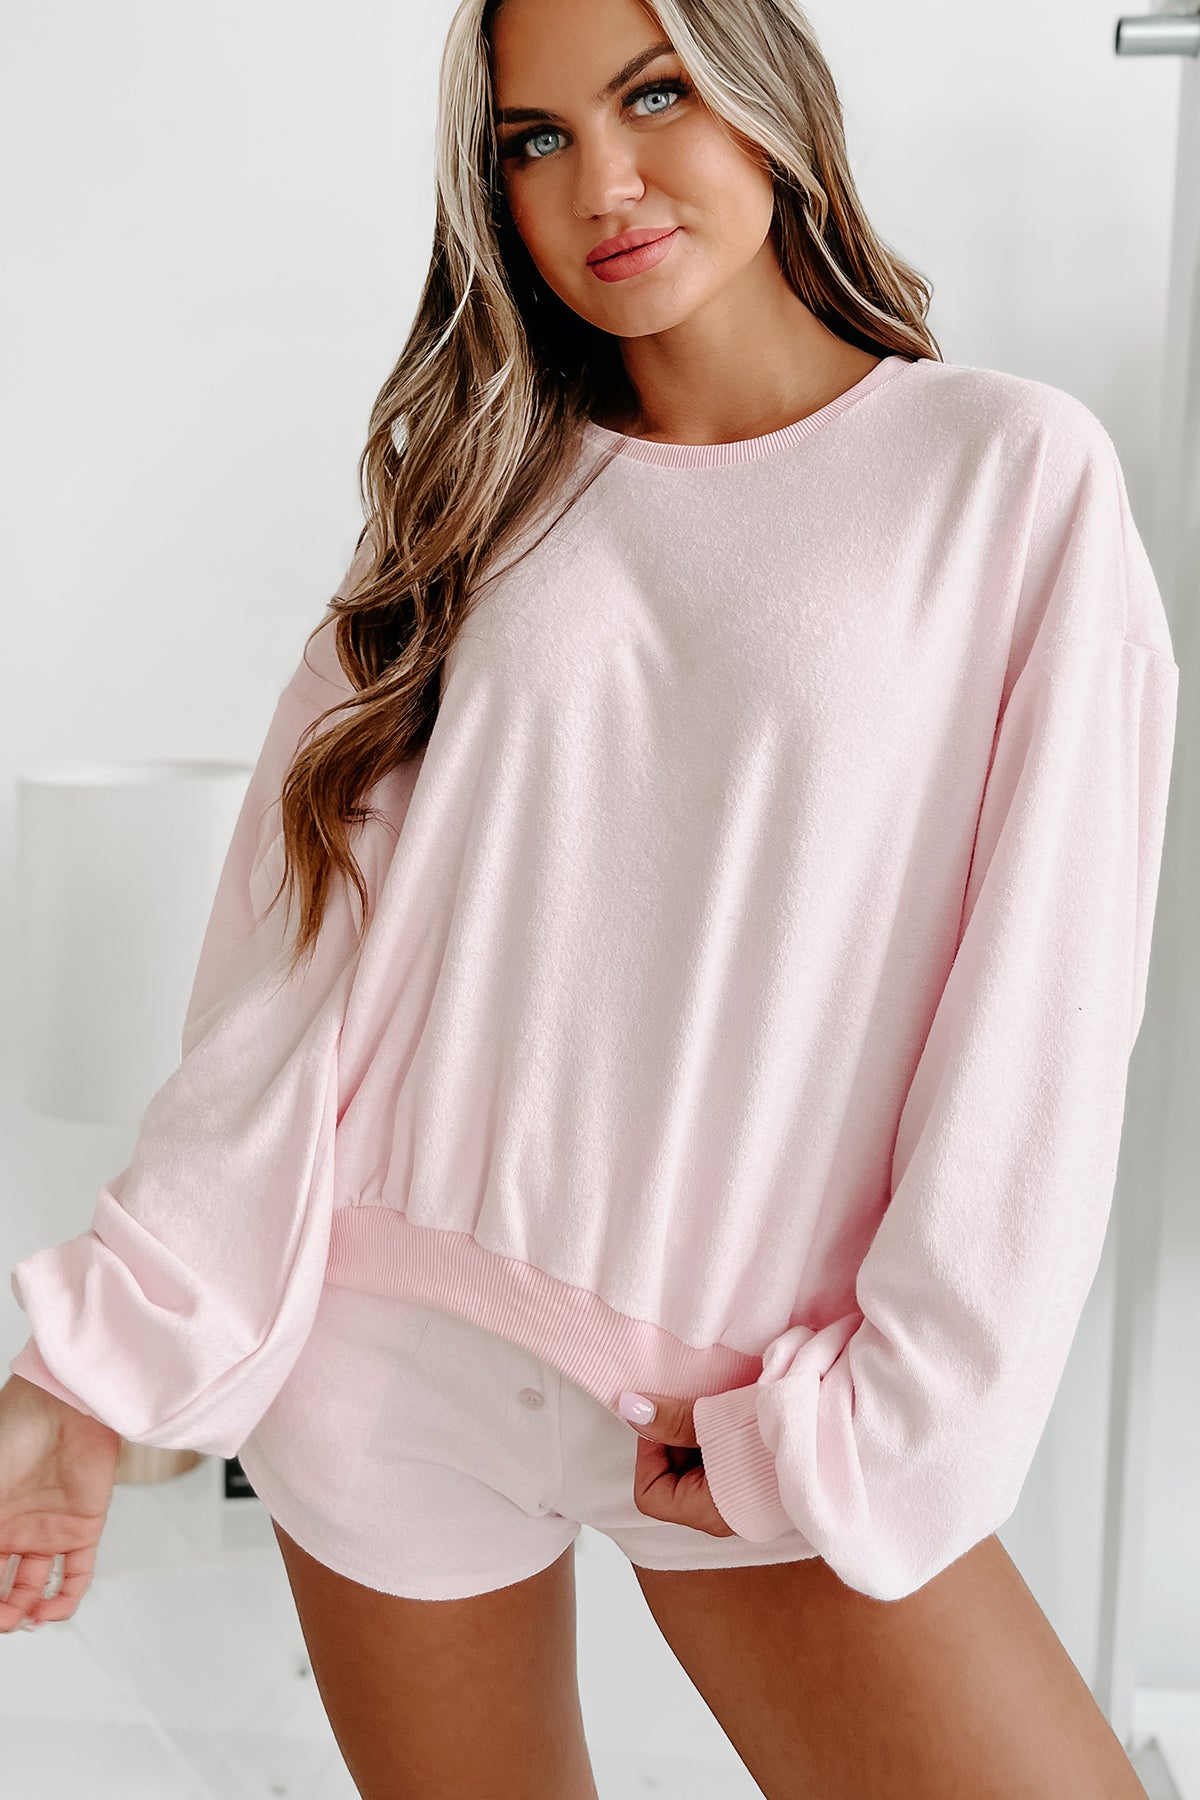 Cozy State Terry Knit Sweatshirt Set the cost Generis Pink) Get Look Sweet lower (Light Shorts for 